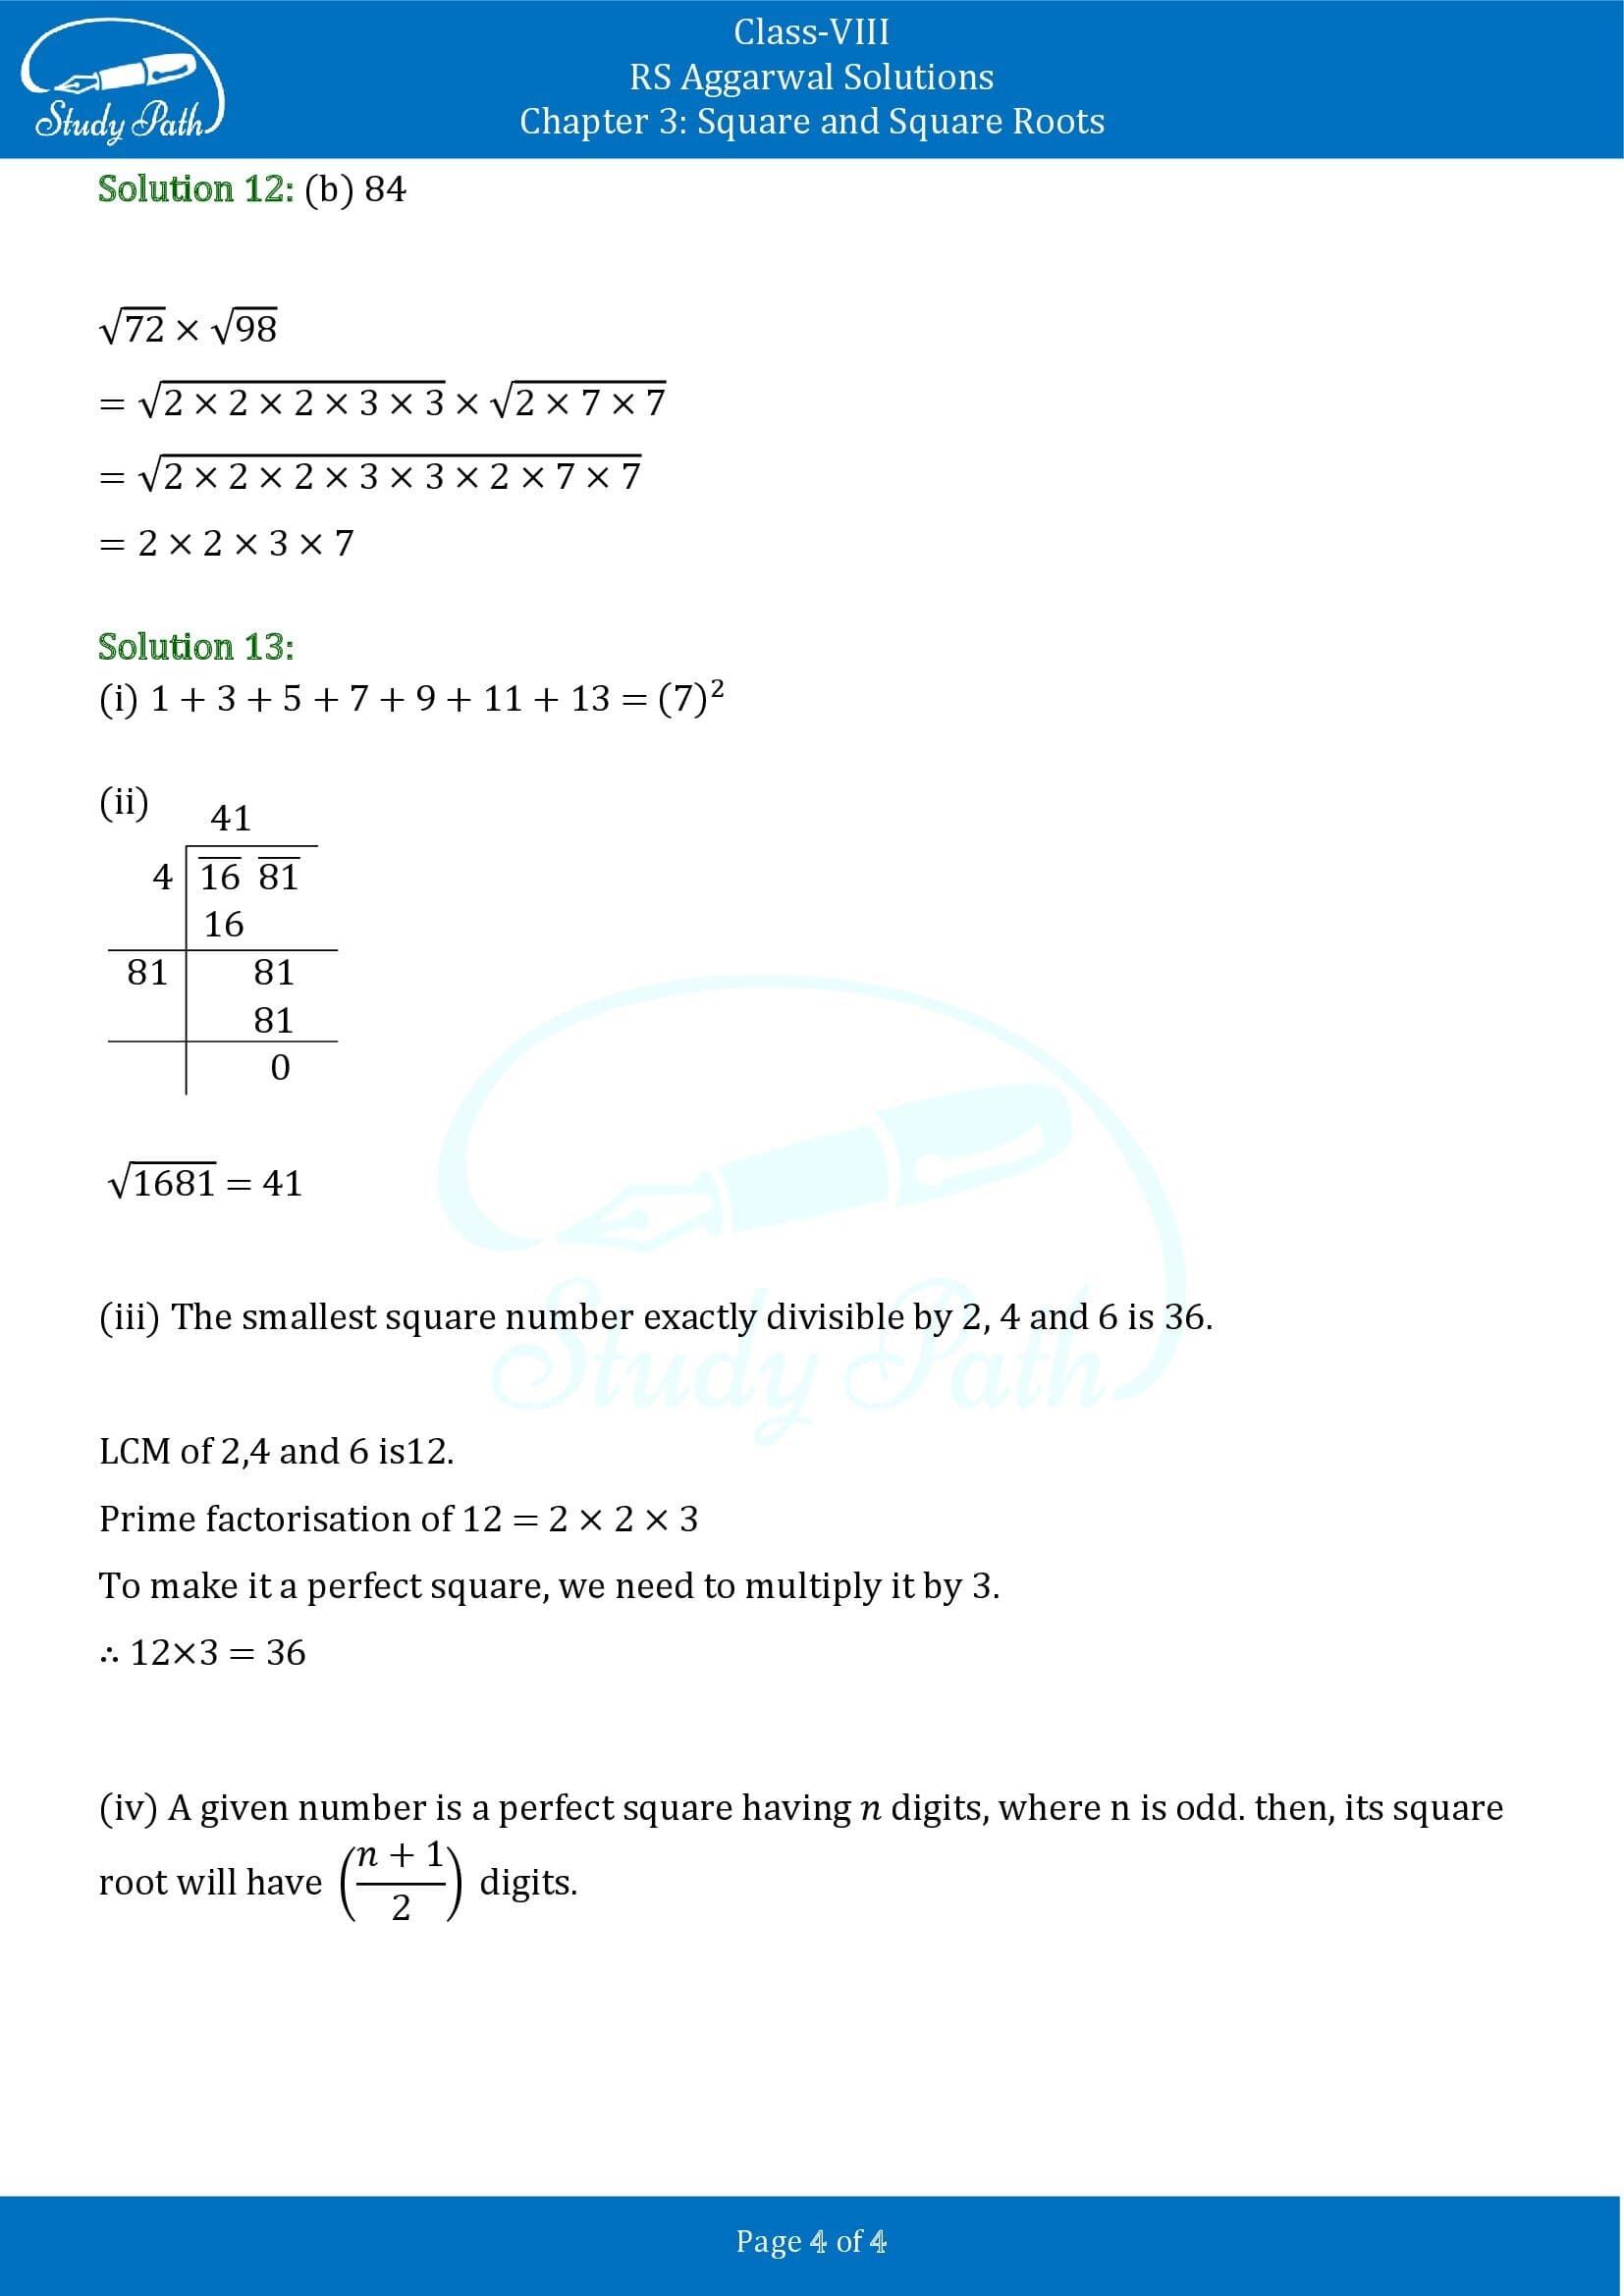 RS Aggarwal Solutions Class 8 Chapter 3 Square and Square Roots Test Paper 00004